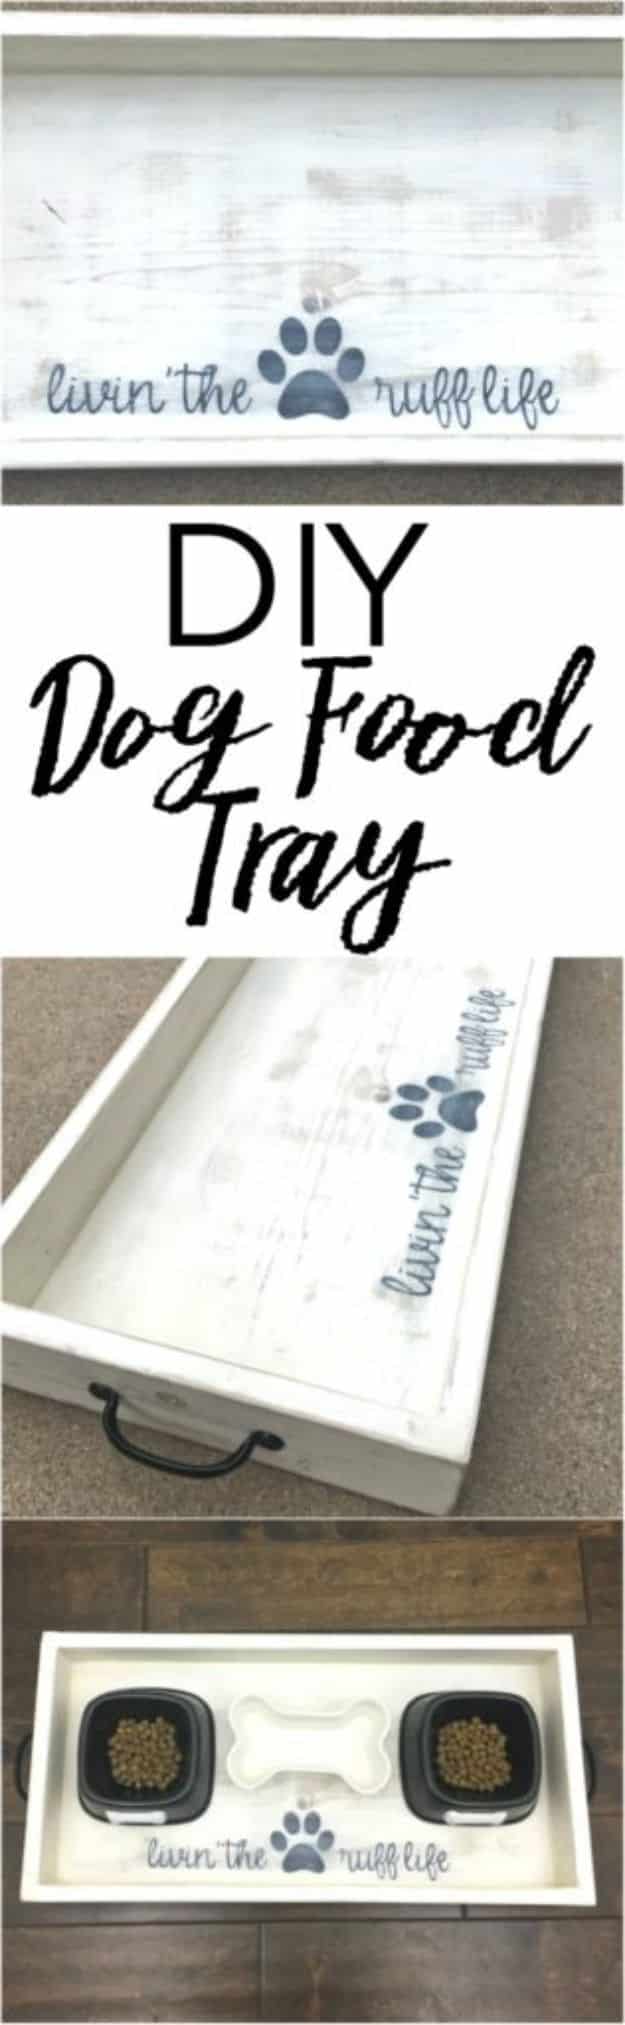 DIY Ideas With Dogs - Dog Food Wood Tray – DIY - Cute and Easy DIY Projects for Dog Lovers - Wall and Home Decor Projects, Things To Make and Sell on Etsy - Quick Gifts to Make for Friends Who Have Puppies and Doggies - Homemade No Sew Projects- Fun Jewelry, Cool Clothes and Accessories #dogs #crafts #diyideas